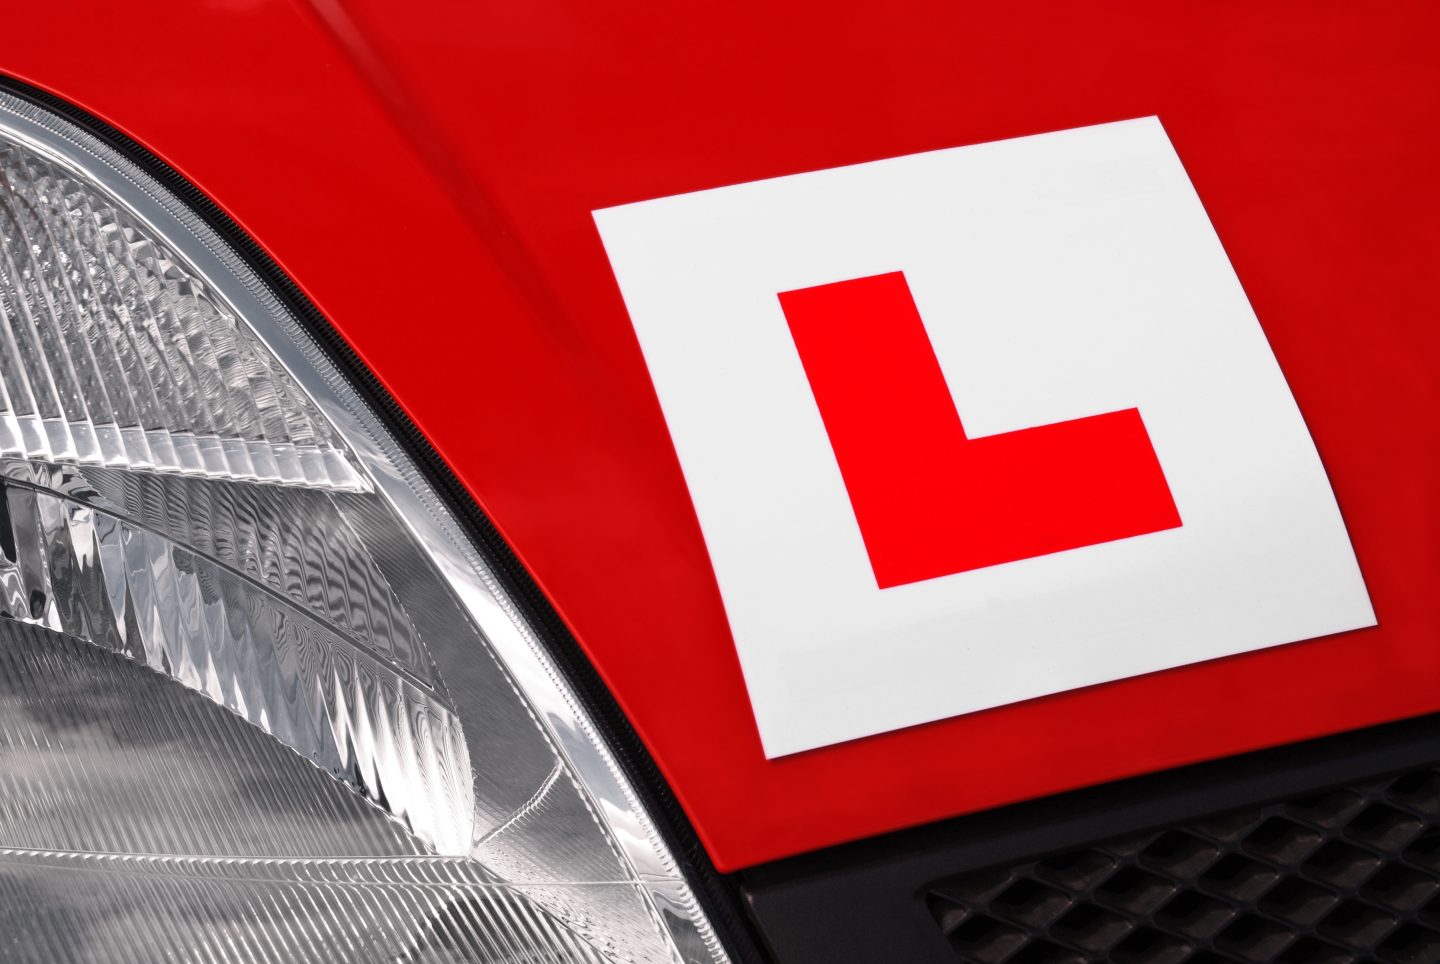 L-plate learner driver